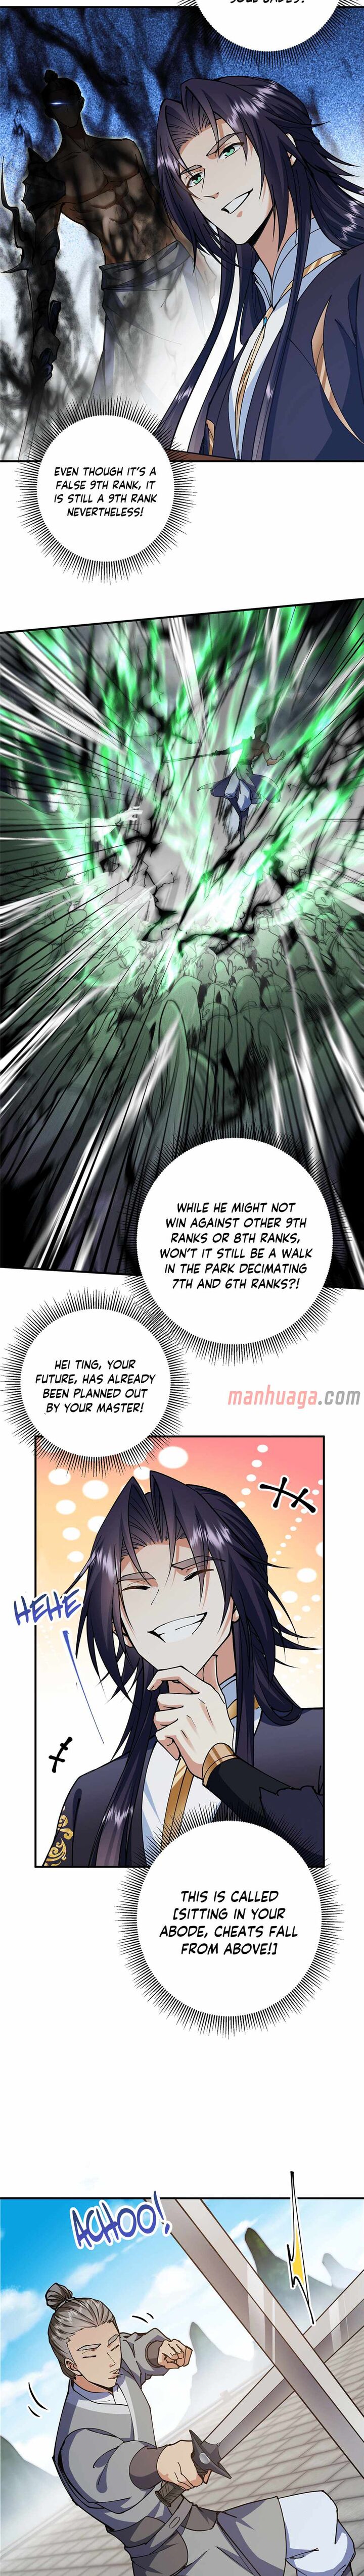 Keep A Low Profile Sect Leader Chapter 308 Page 3